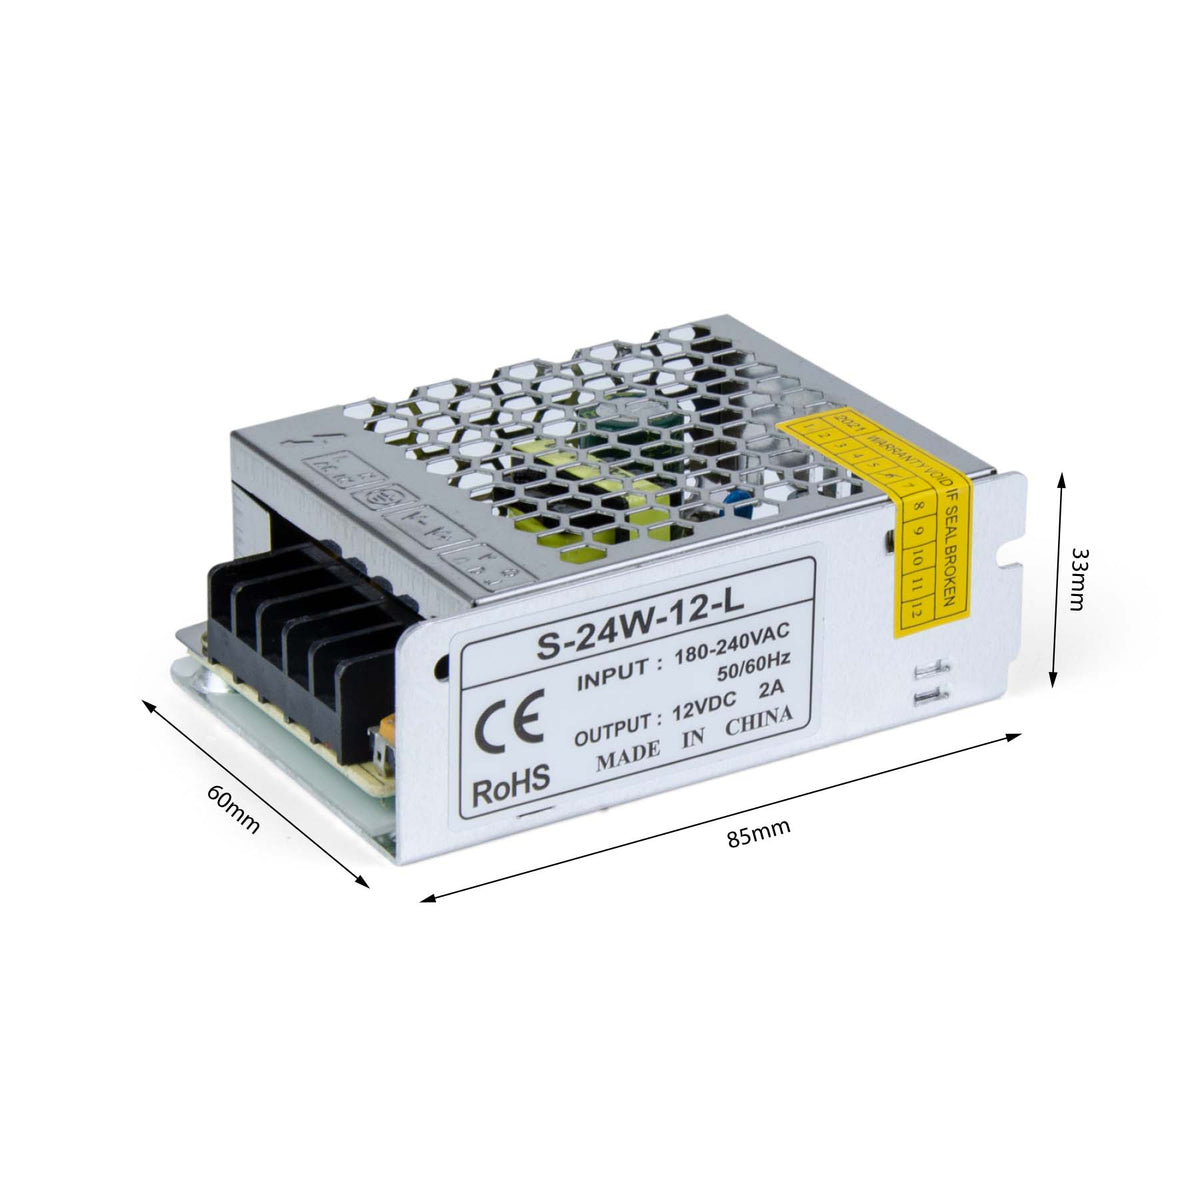 G.W.S. LED LED Drivers/LED Power Supplies IP20 (Non-Waterproof) / 12V / 24W 12V 2A 24W LED Driver